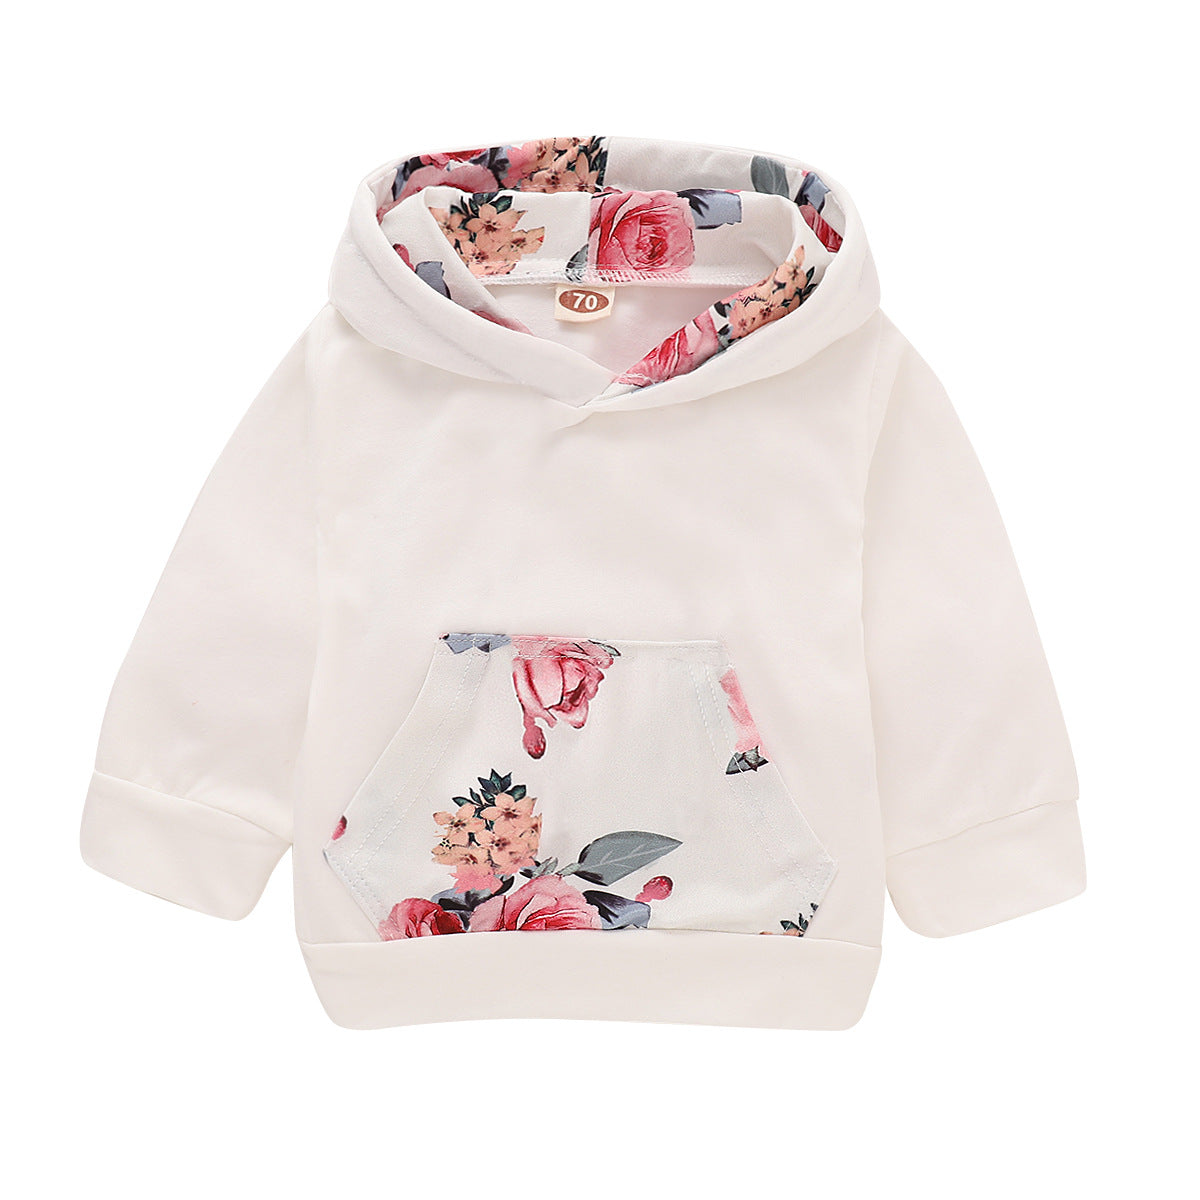 QuirkyChic Baby Dress Delight: Children's Hood Printing Suit